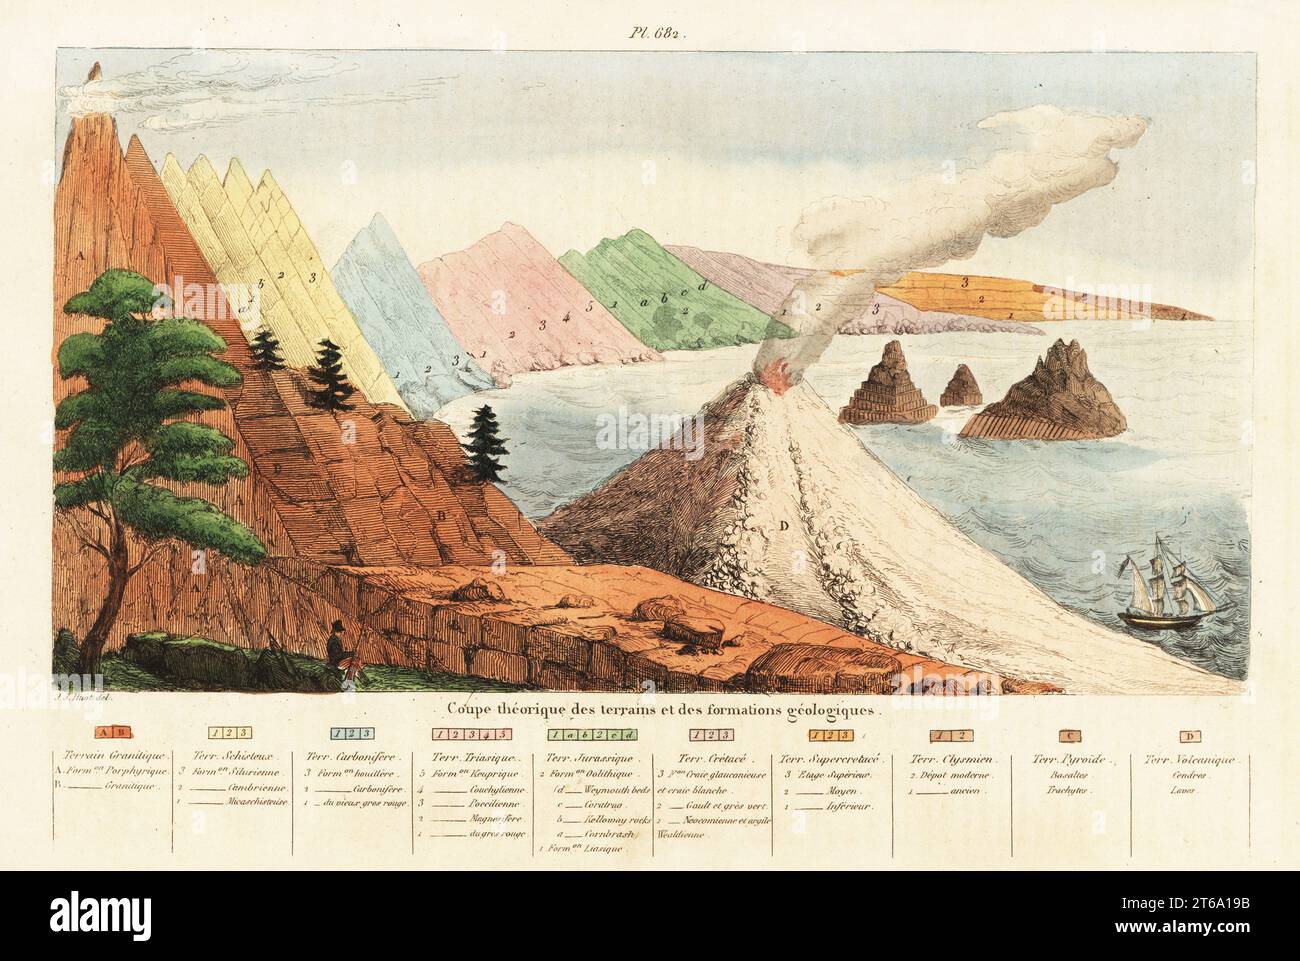 Theoretical cross-section of geological formations and terrains: granitic, schistose, carboniferous, Triassic, Jurassic, Cretaceous, Supercretaceous, chysmian, pyroide, and volcanic. Handcoloured steel engraving after an illustration by J. J. Huot from Felix-Edouard Guerin-Meneville's Dictionnaire Pittoresque d'Histoire Naturelle (Picturesque Dictionary of Natural History), Paris, 1834-39. Stock Photo